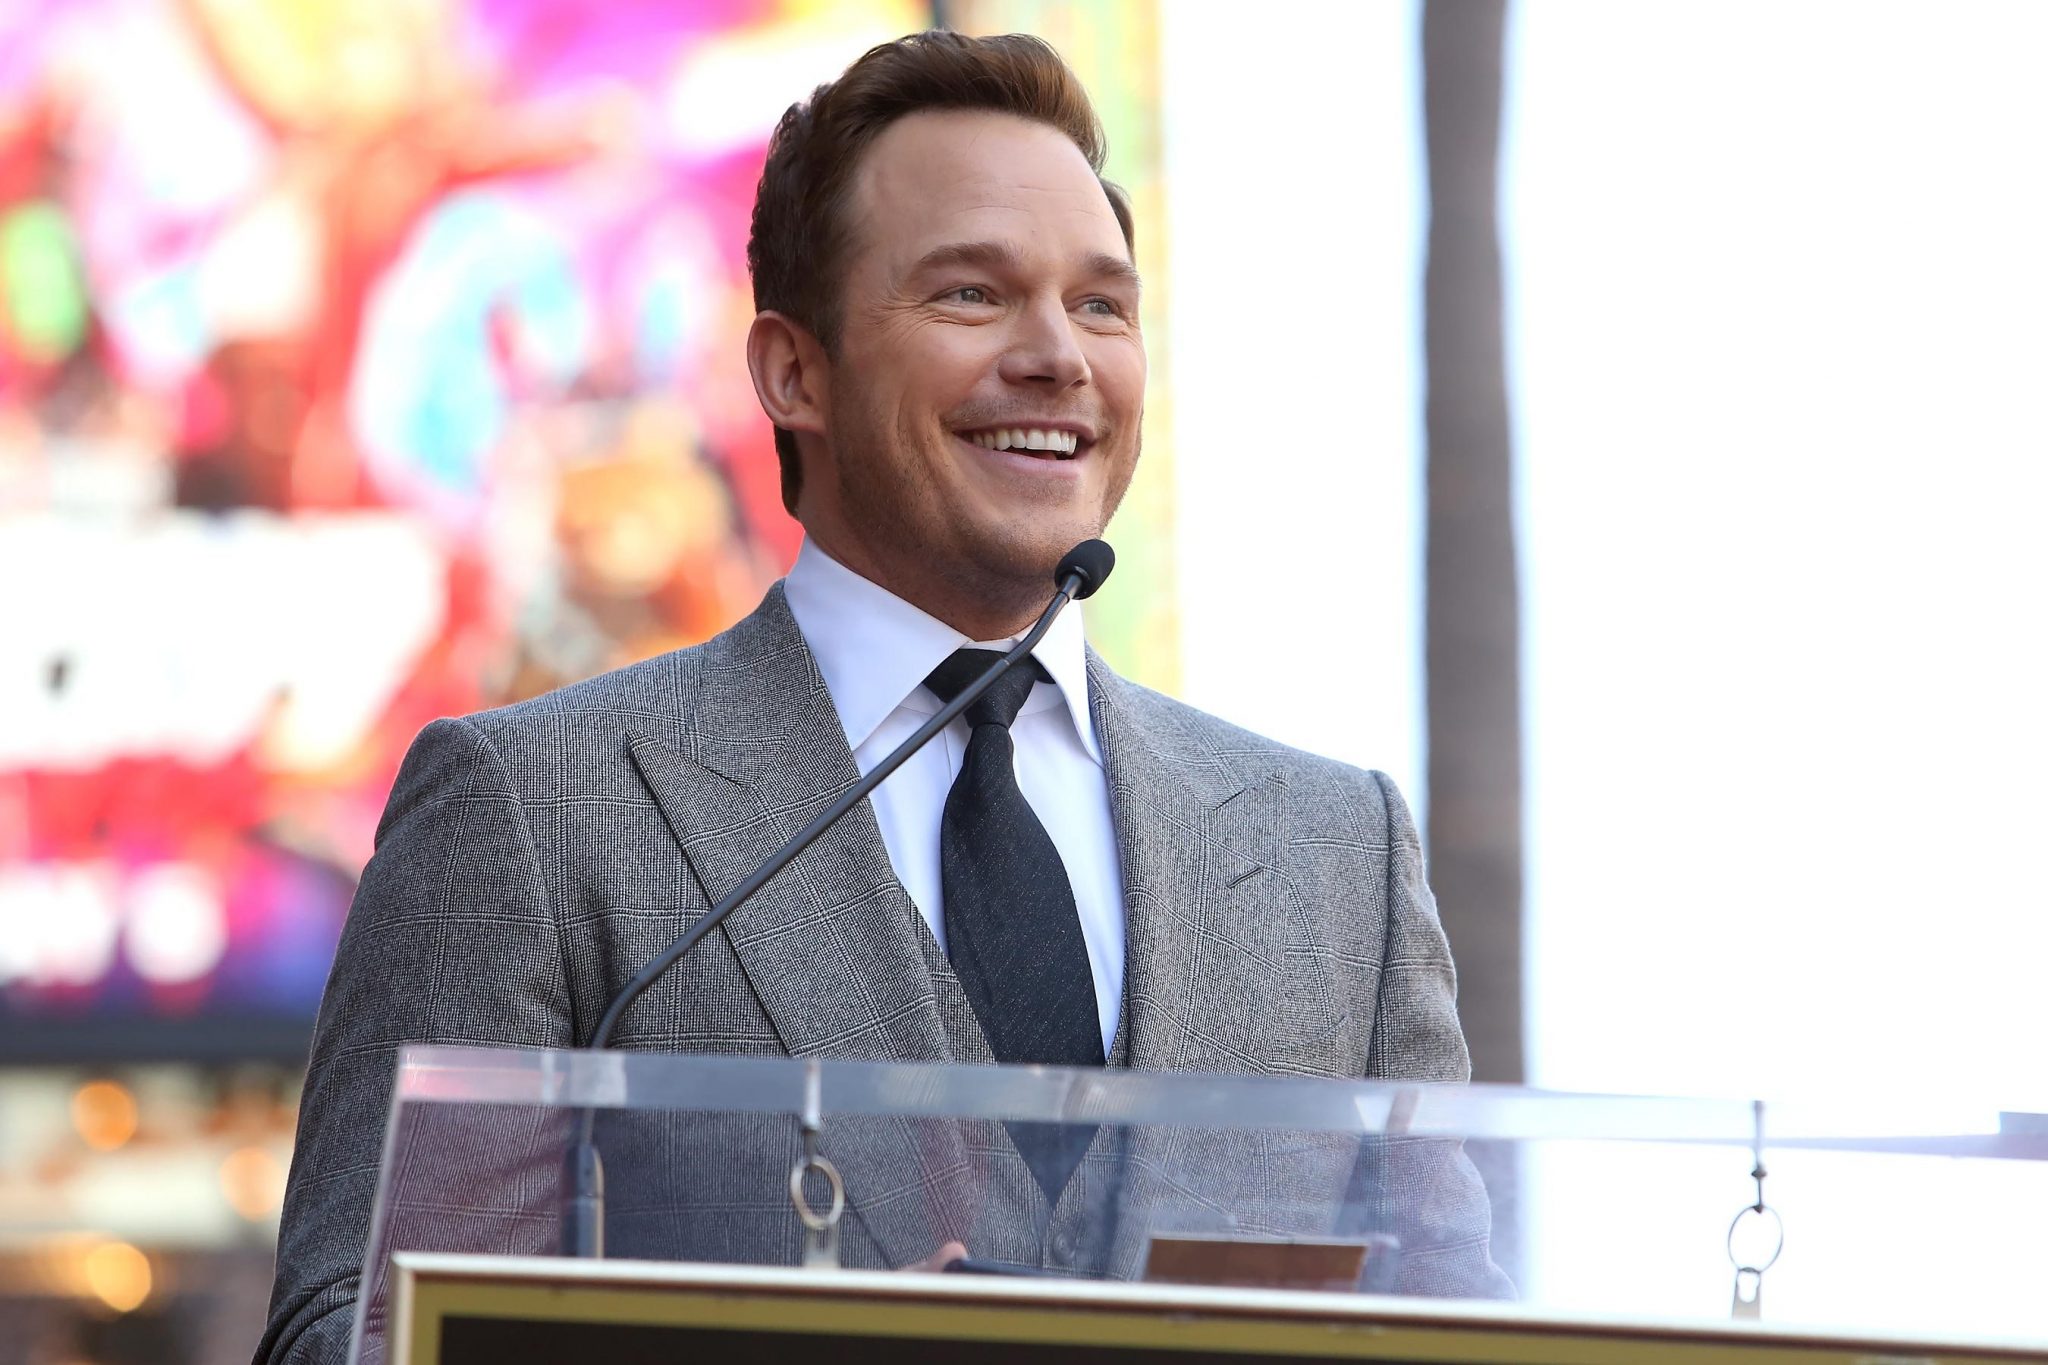 Chris Pratt Accepts His Hollywood Walk of Fame Star With A Powerfully Emotional Speech